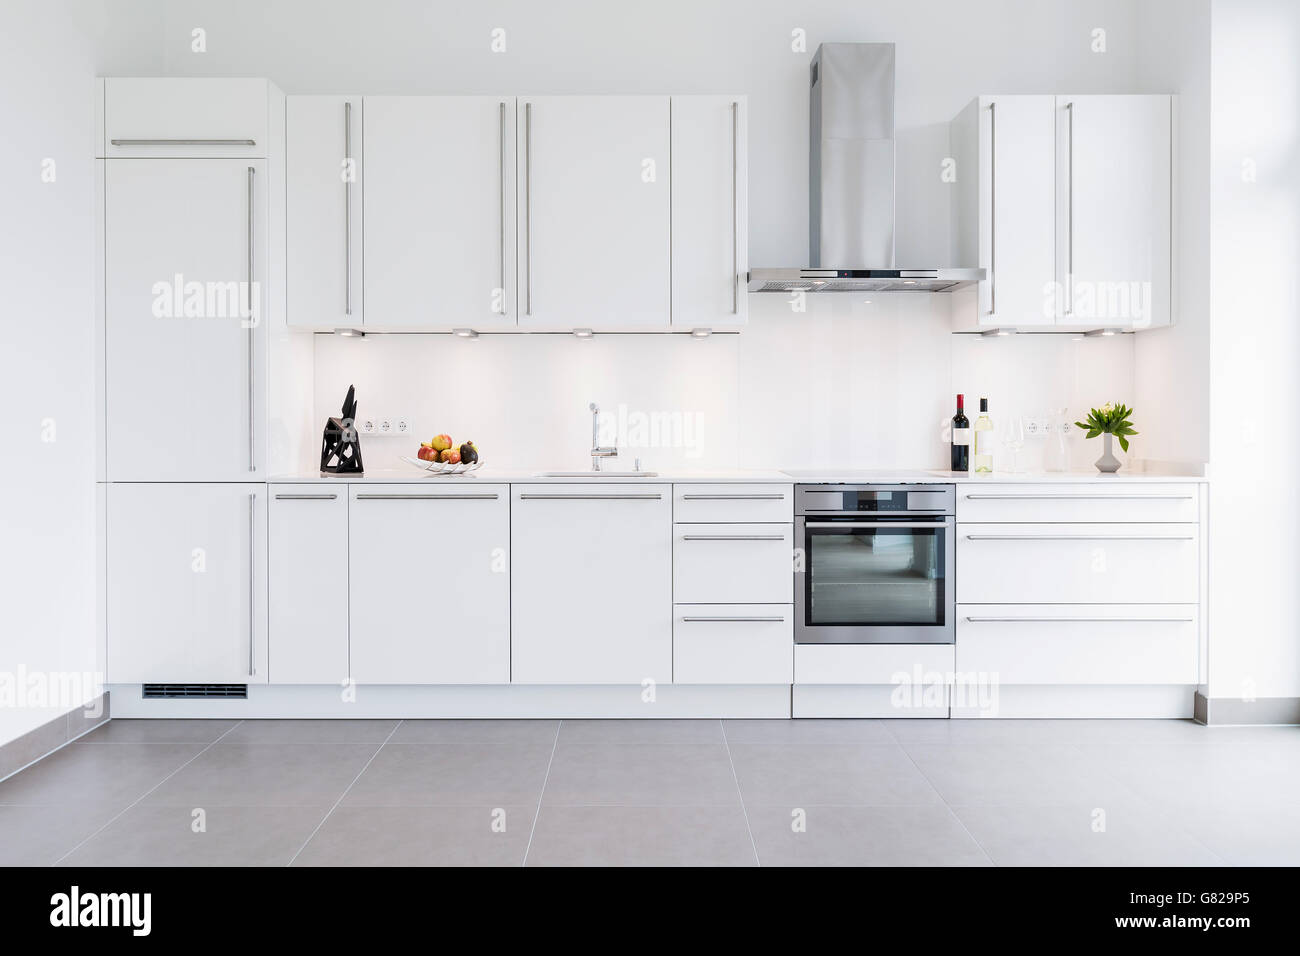 Modern kitchen design with white cabinets Stock Photo